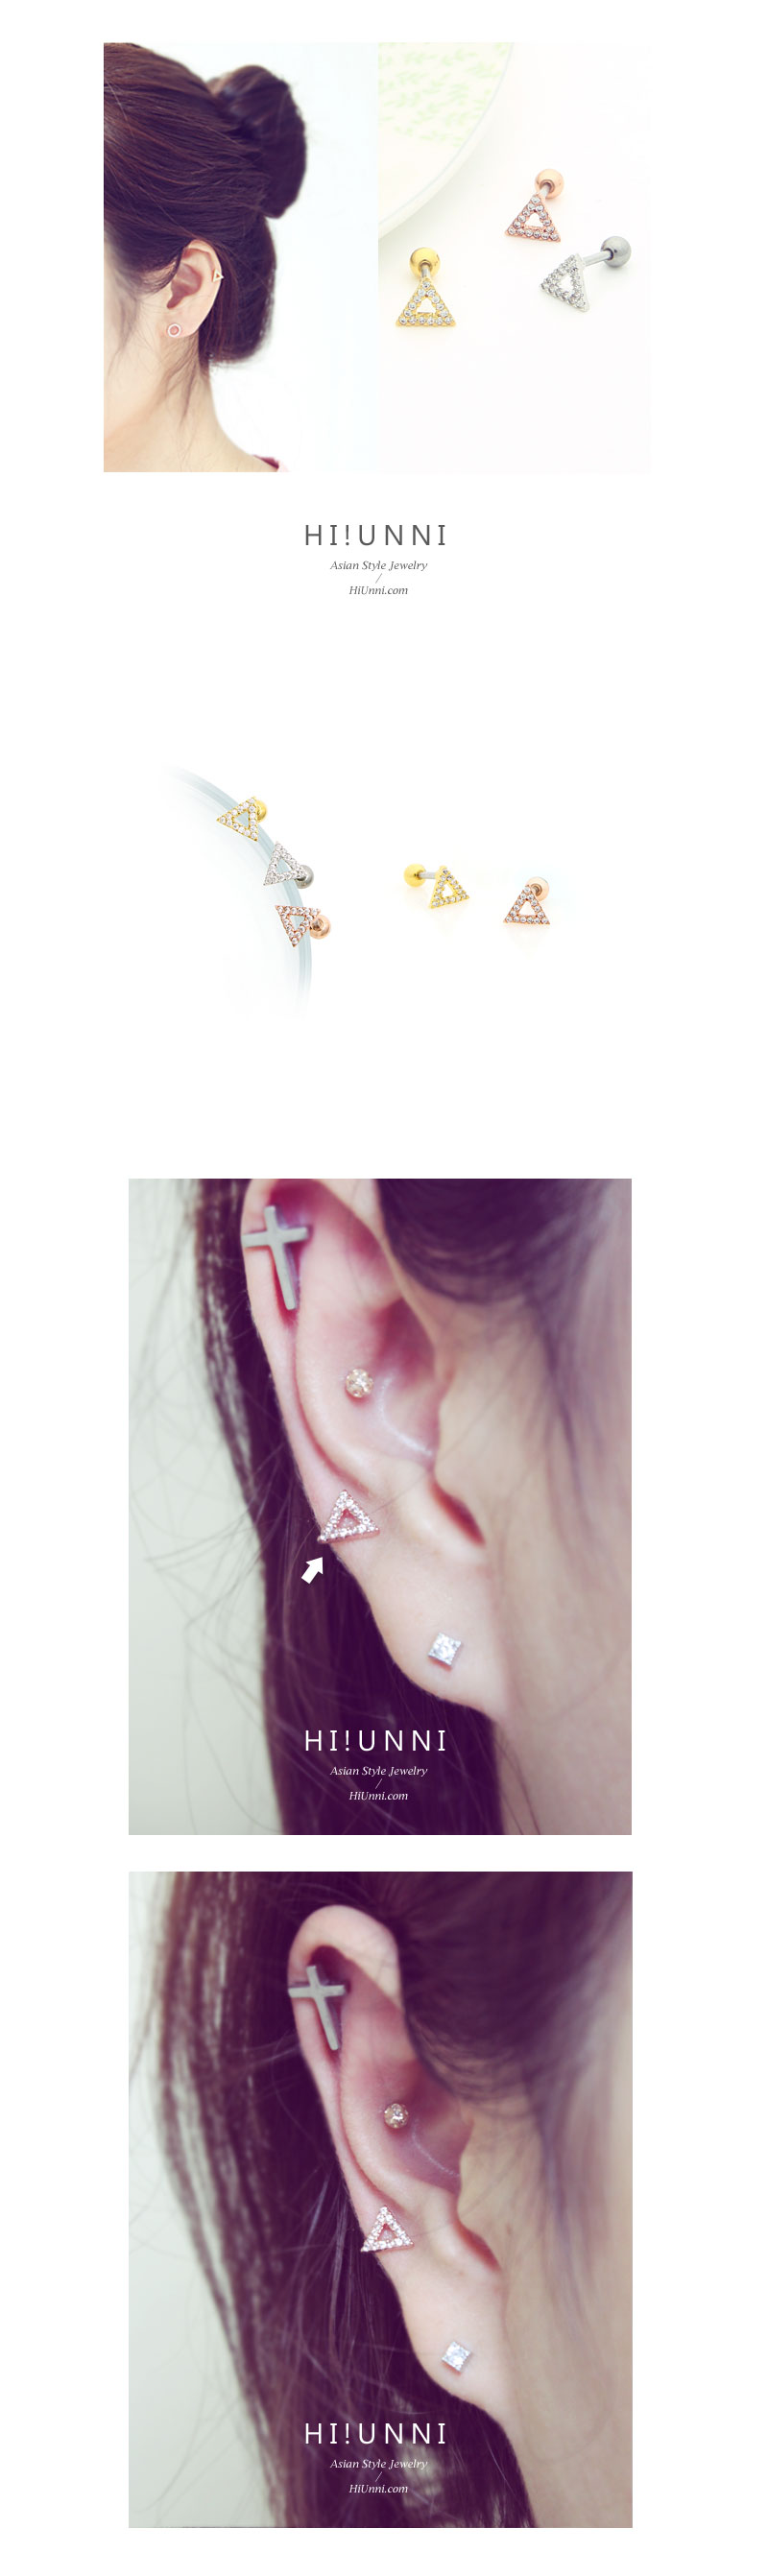 ear_studs_piercing_cartilage_earrings_16g_316l_surgical_stainless_steel_jewelry_barbell_rose_gold_helix_conch_labret_triangle_4